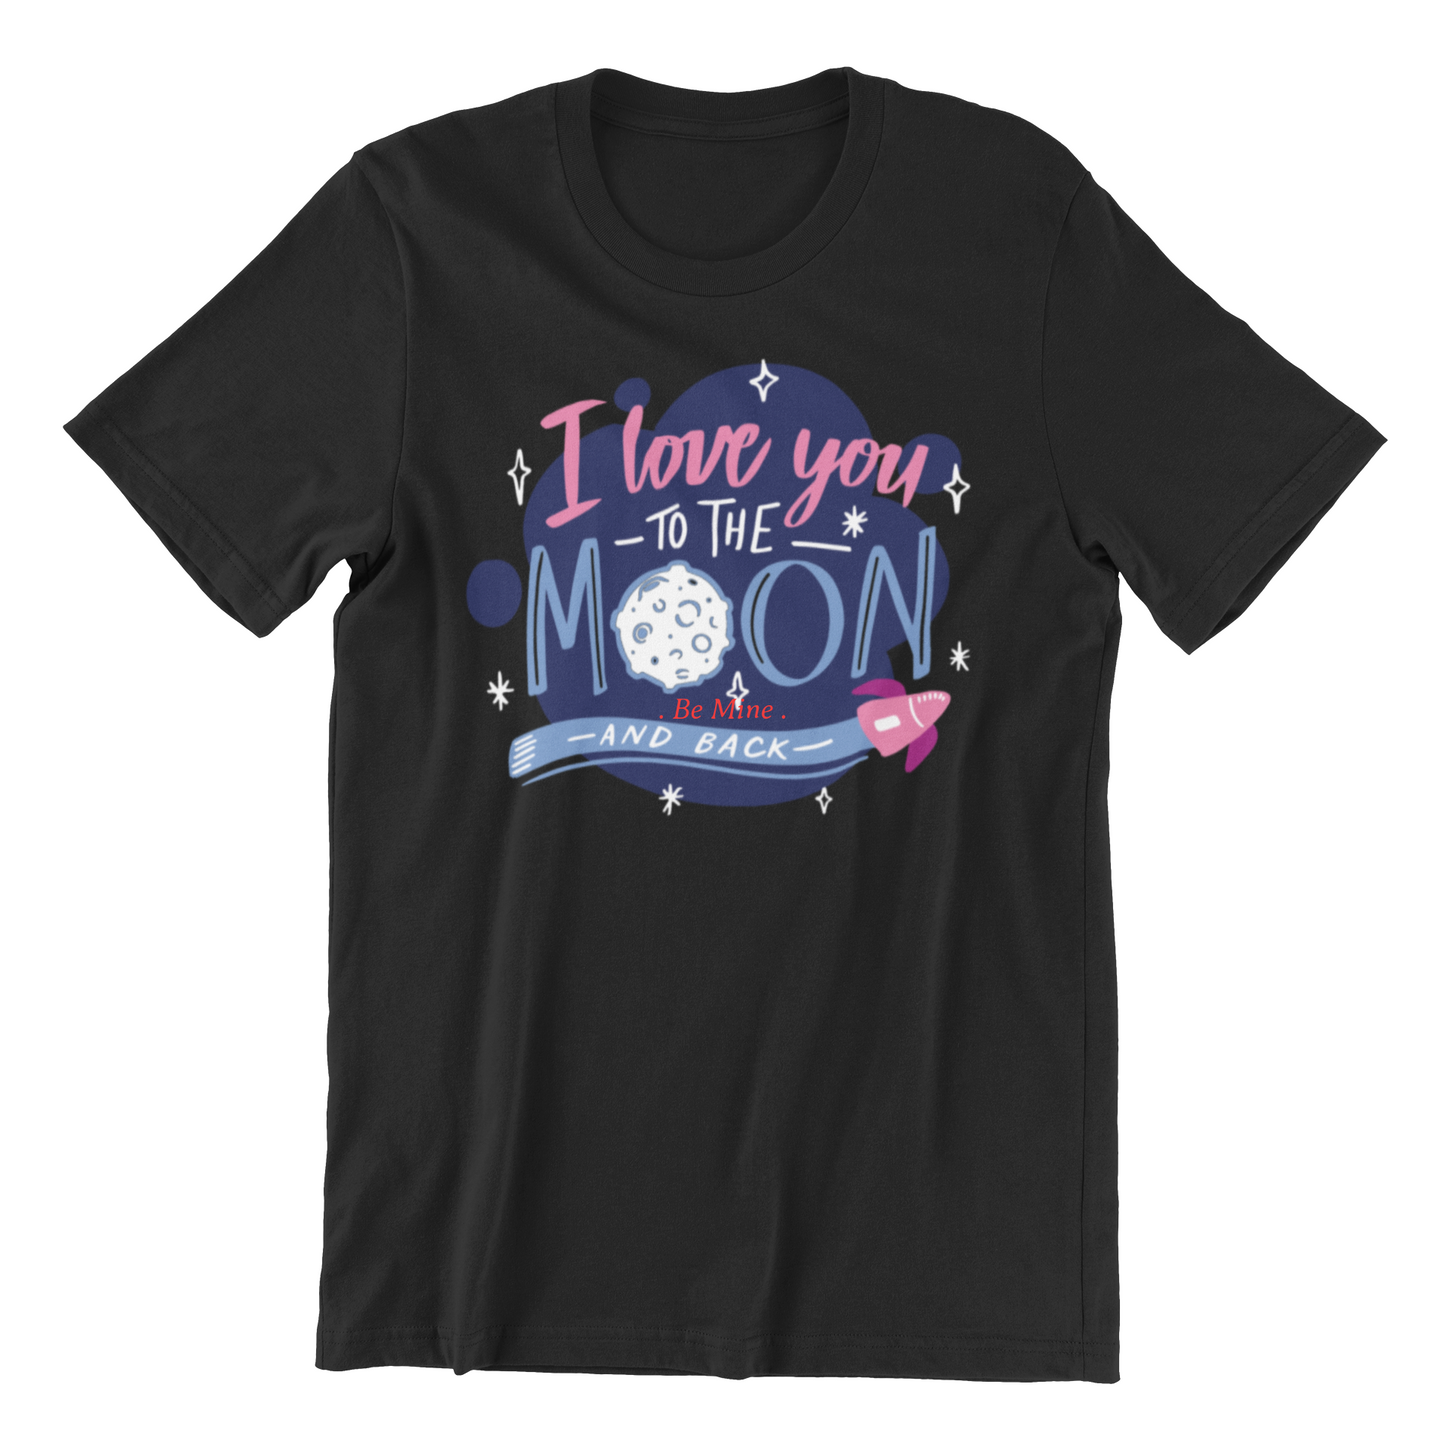 TO THE MOON valentine special t-shirt